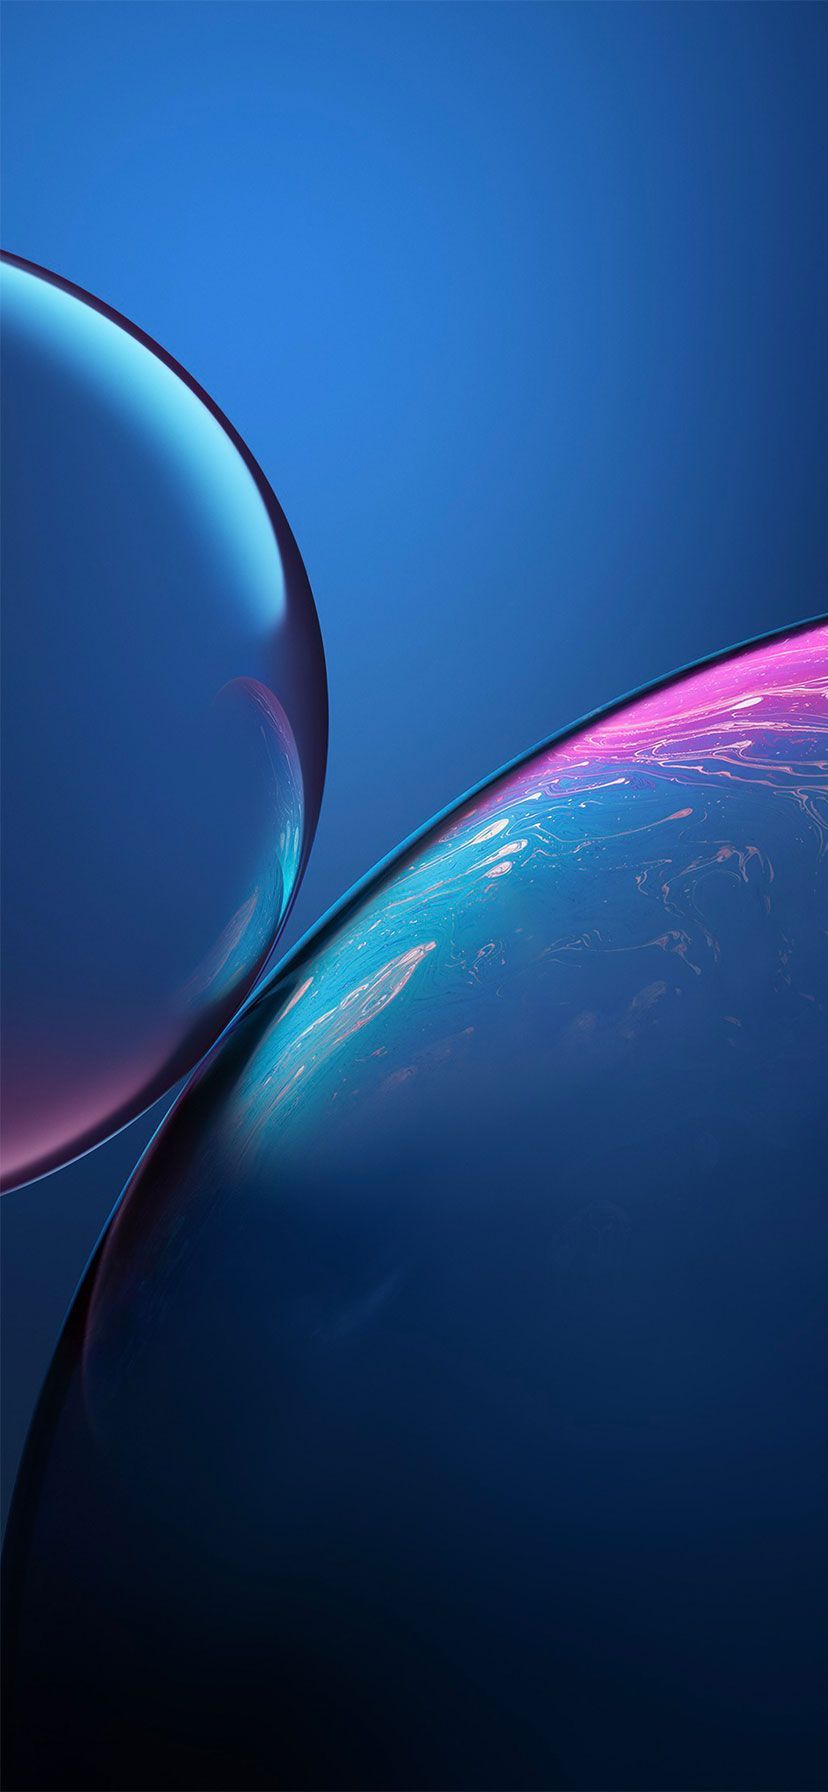 iPhone XR Stock Wallpaper Free iPhone XR Stock Background